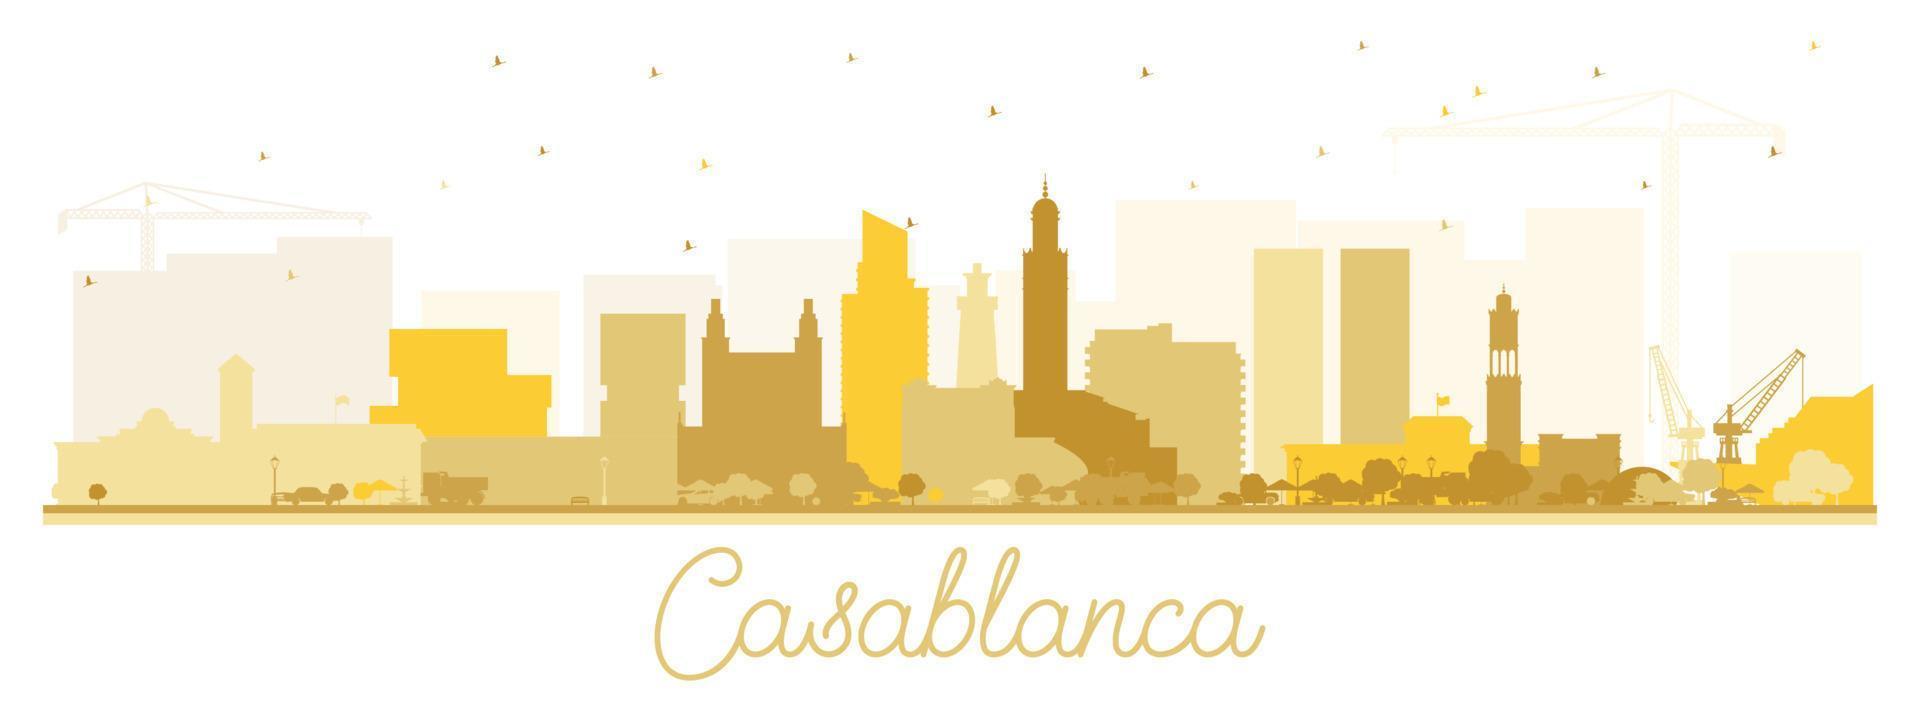 Casablanca Morocco City Skyline Silhouette with Golden Buildings Isolated on White. vector